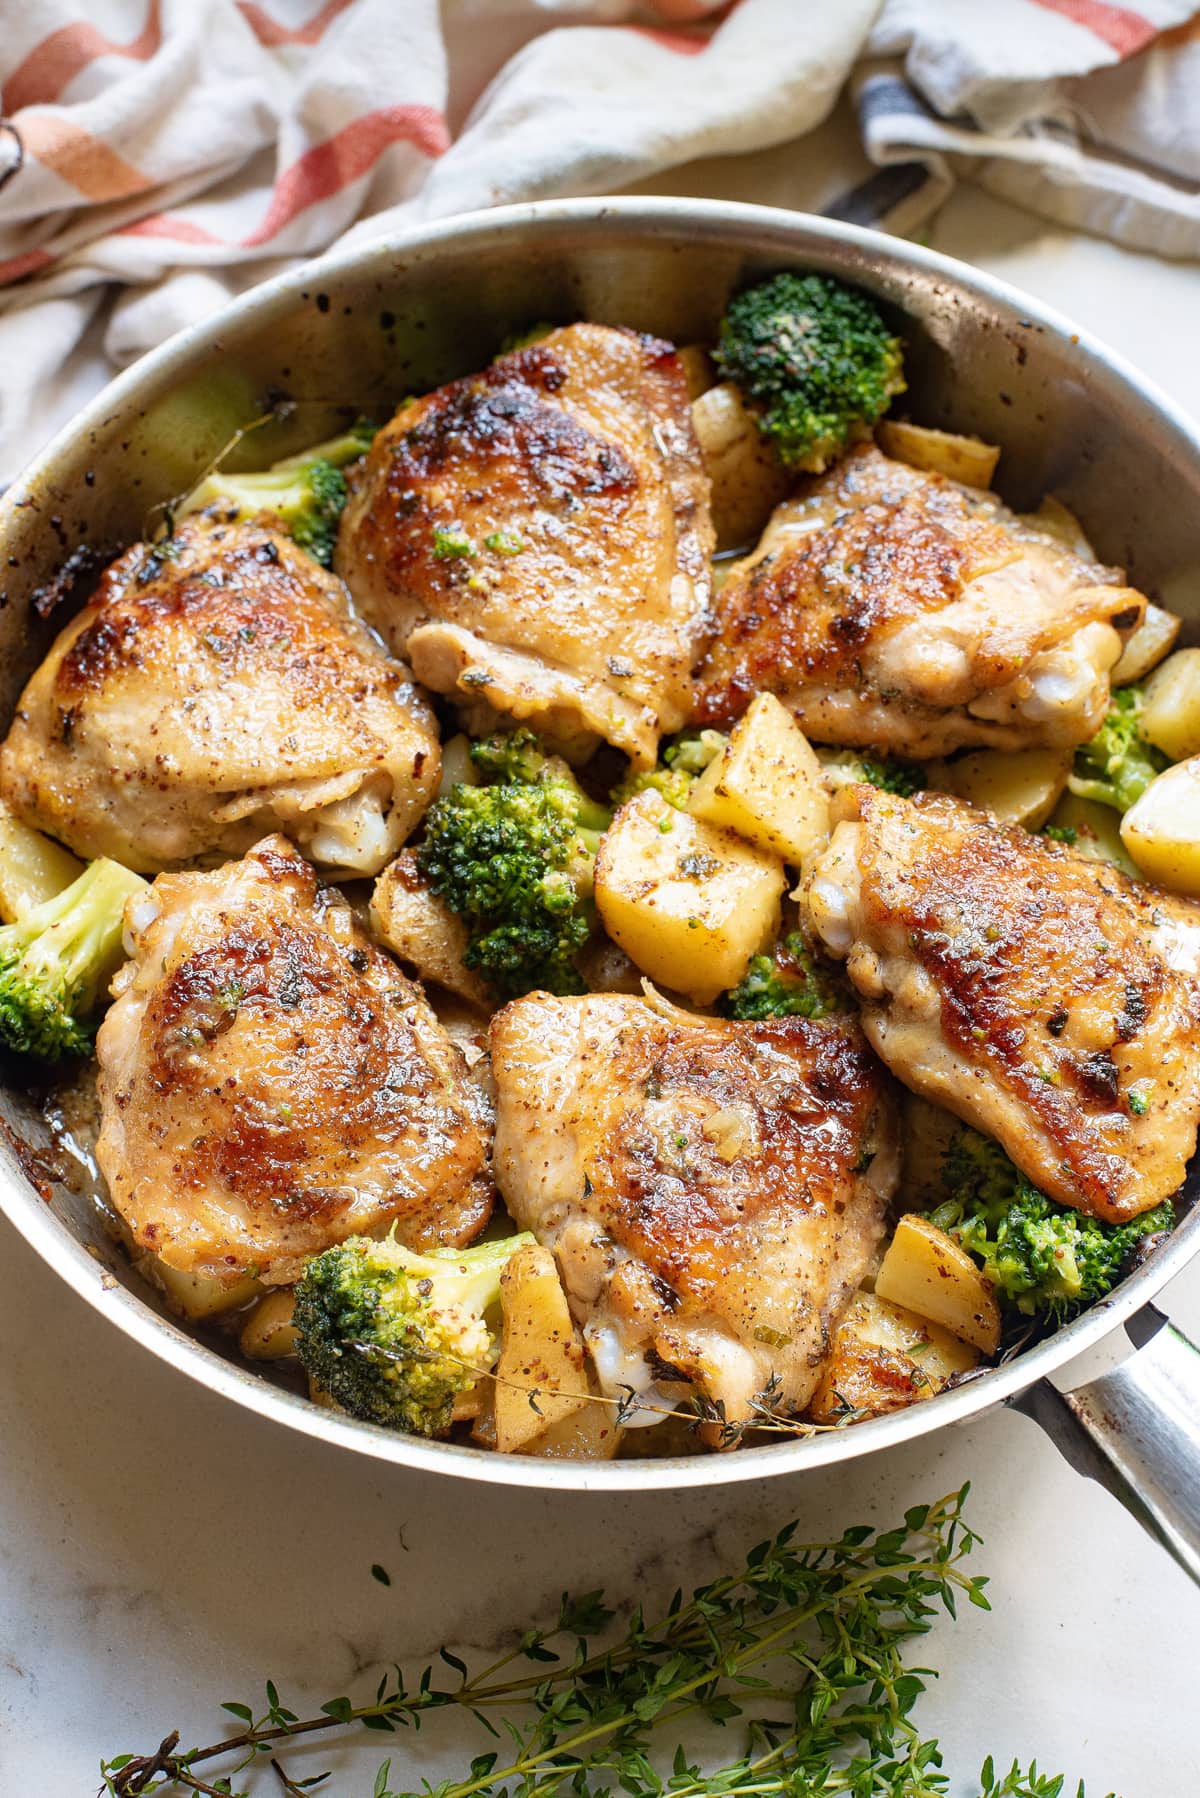 Angled view of a skillet of honey mustard chicken and potatoes with broccoli